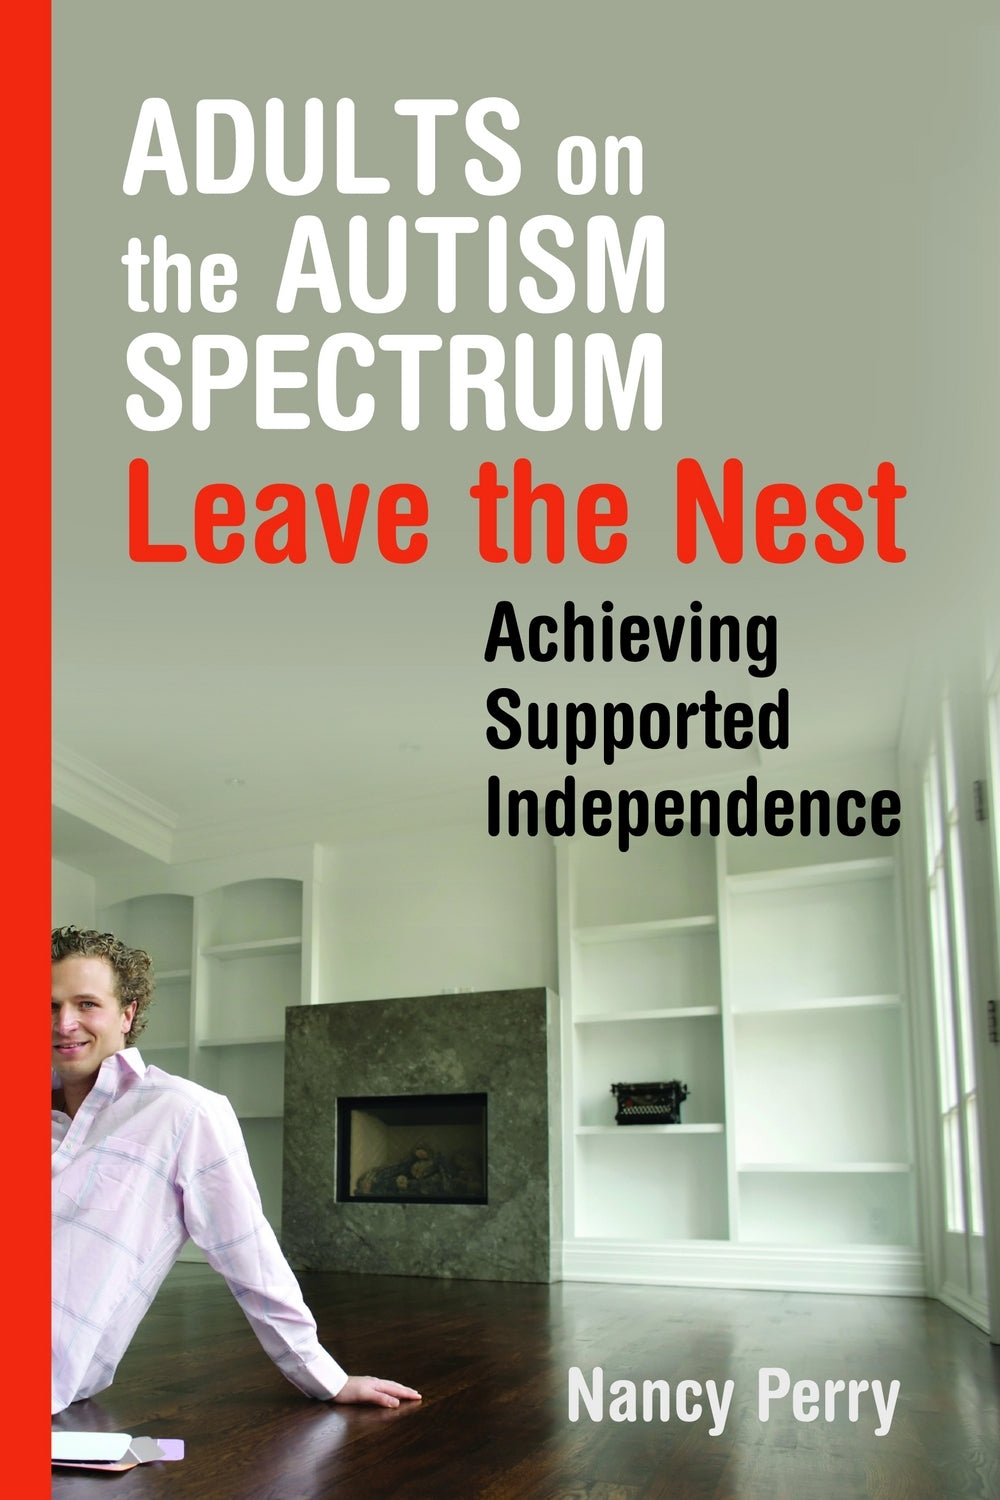 Adults on the Autism Spectrum Leave the Nest by Nancy Perry